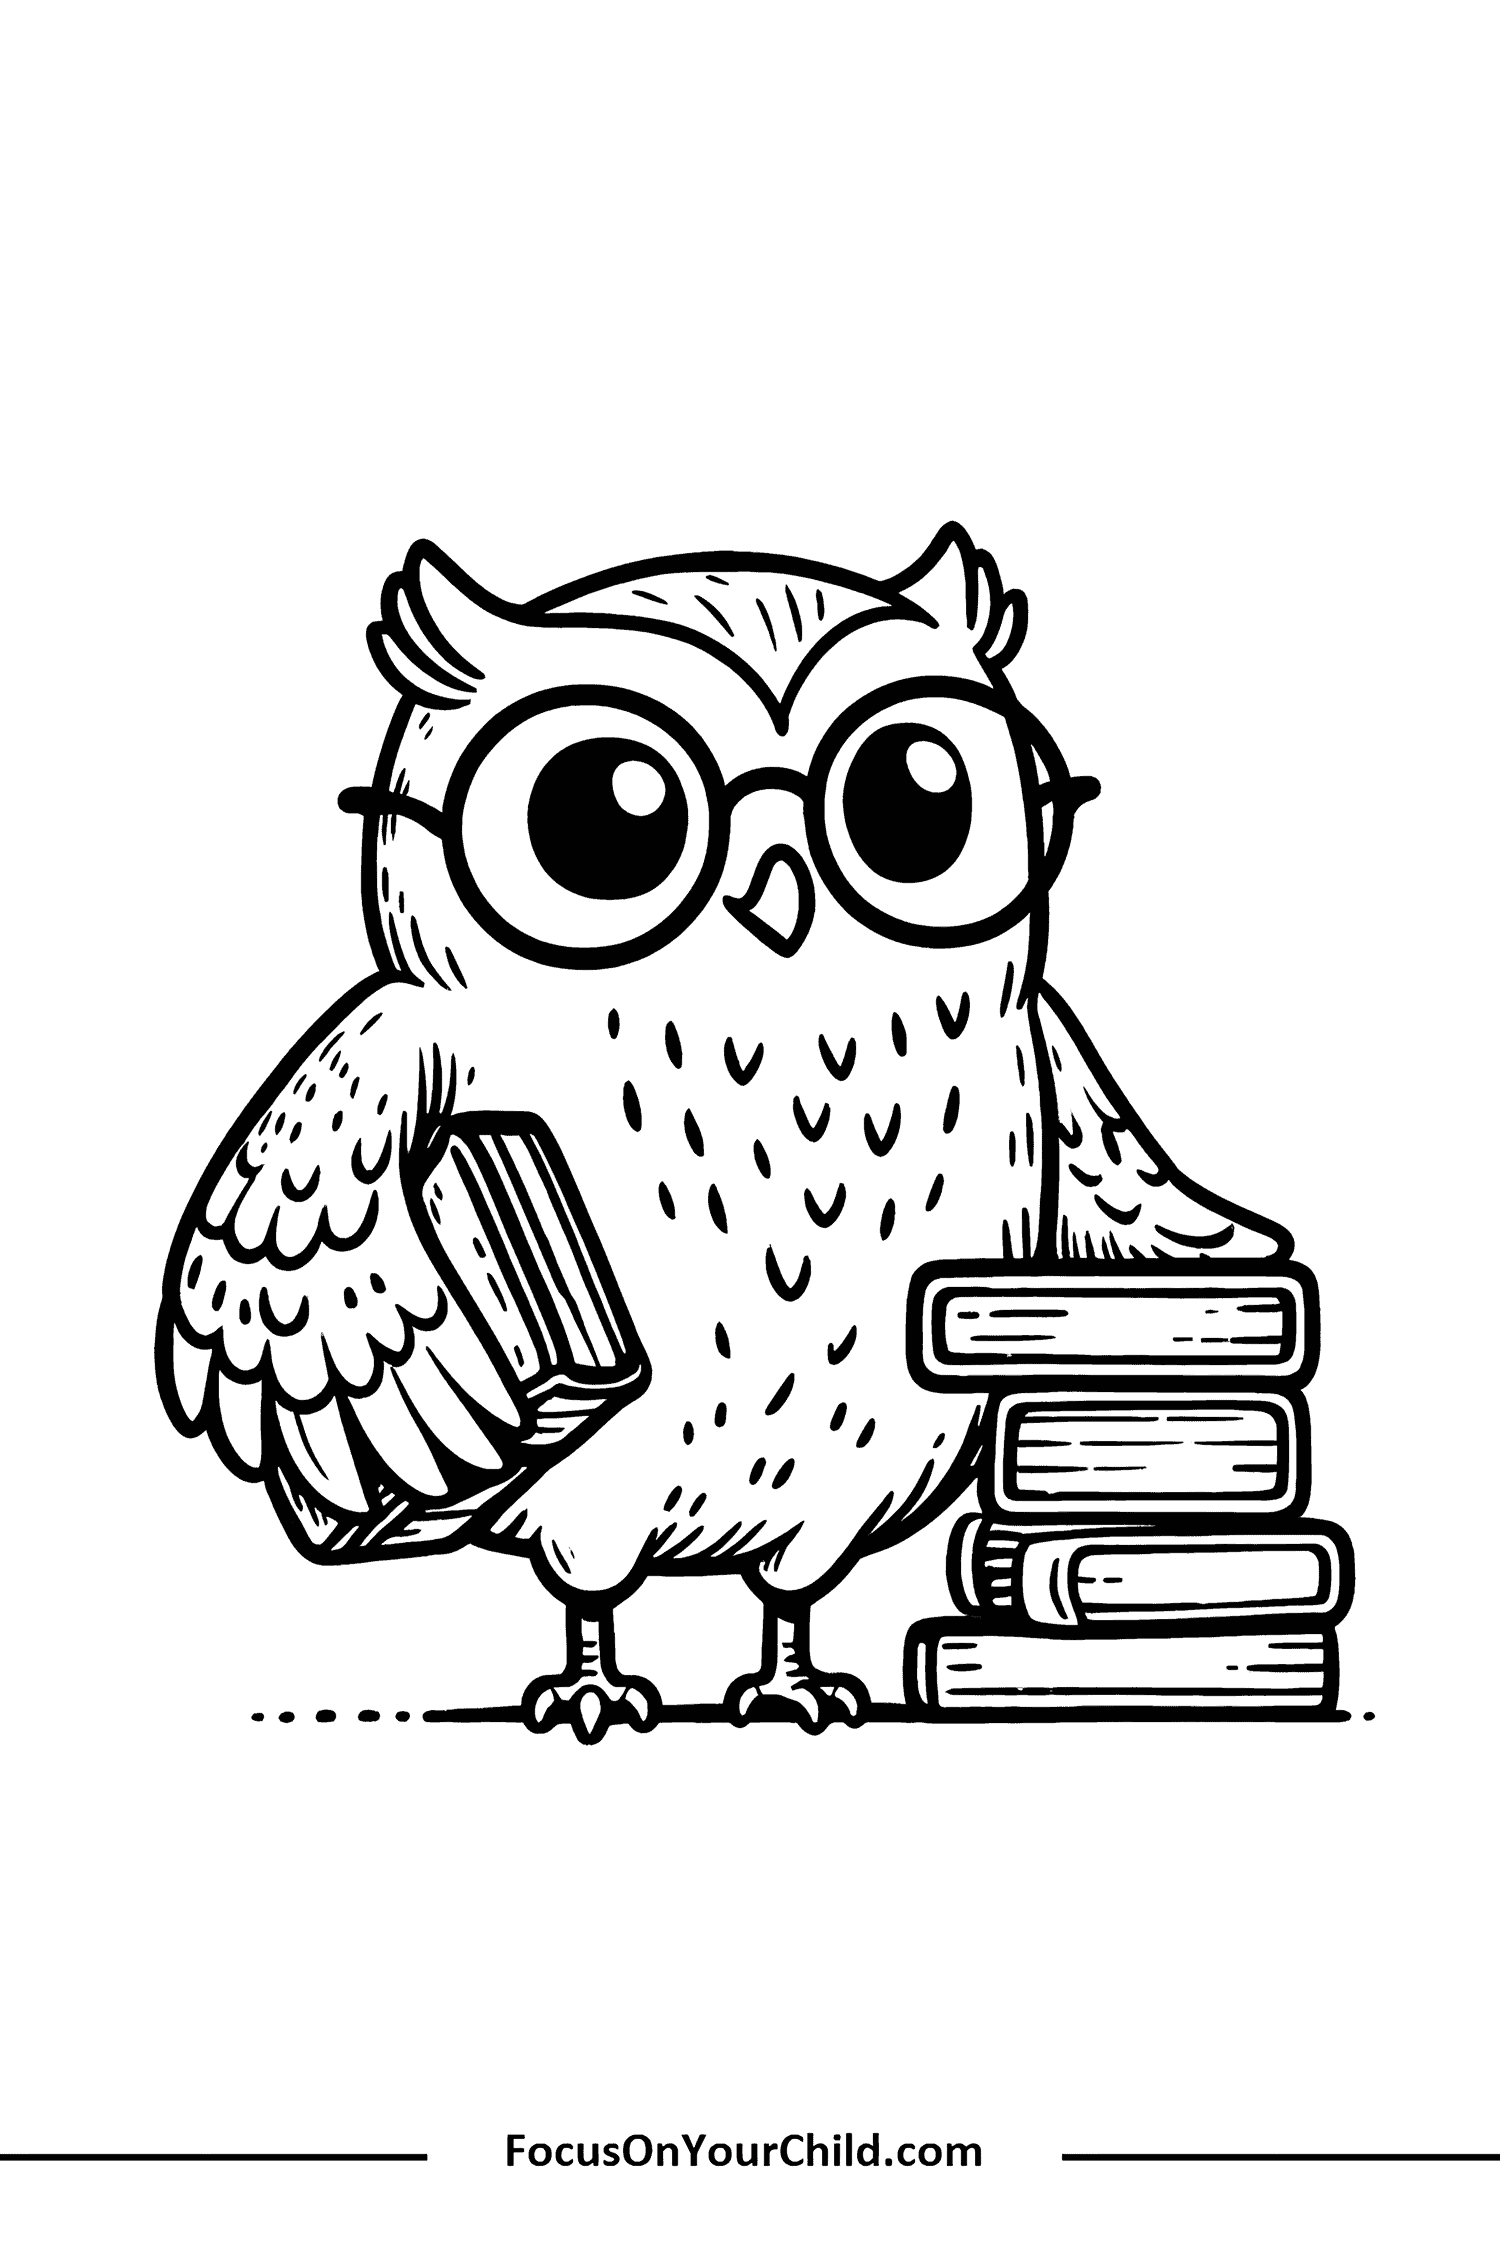 Charming owl with books for coloring from FocusOnYourChild.com.